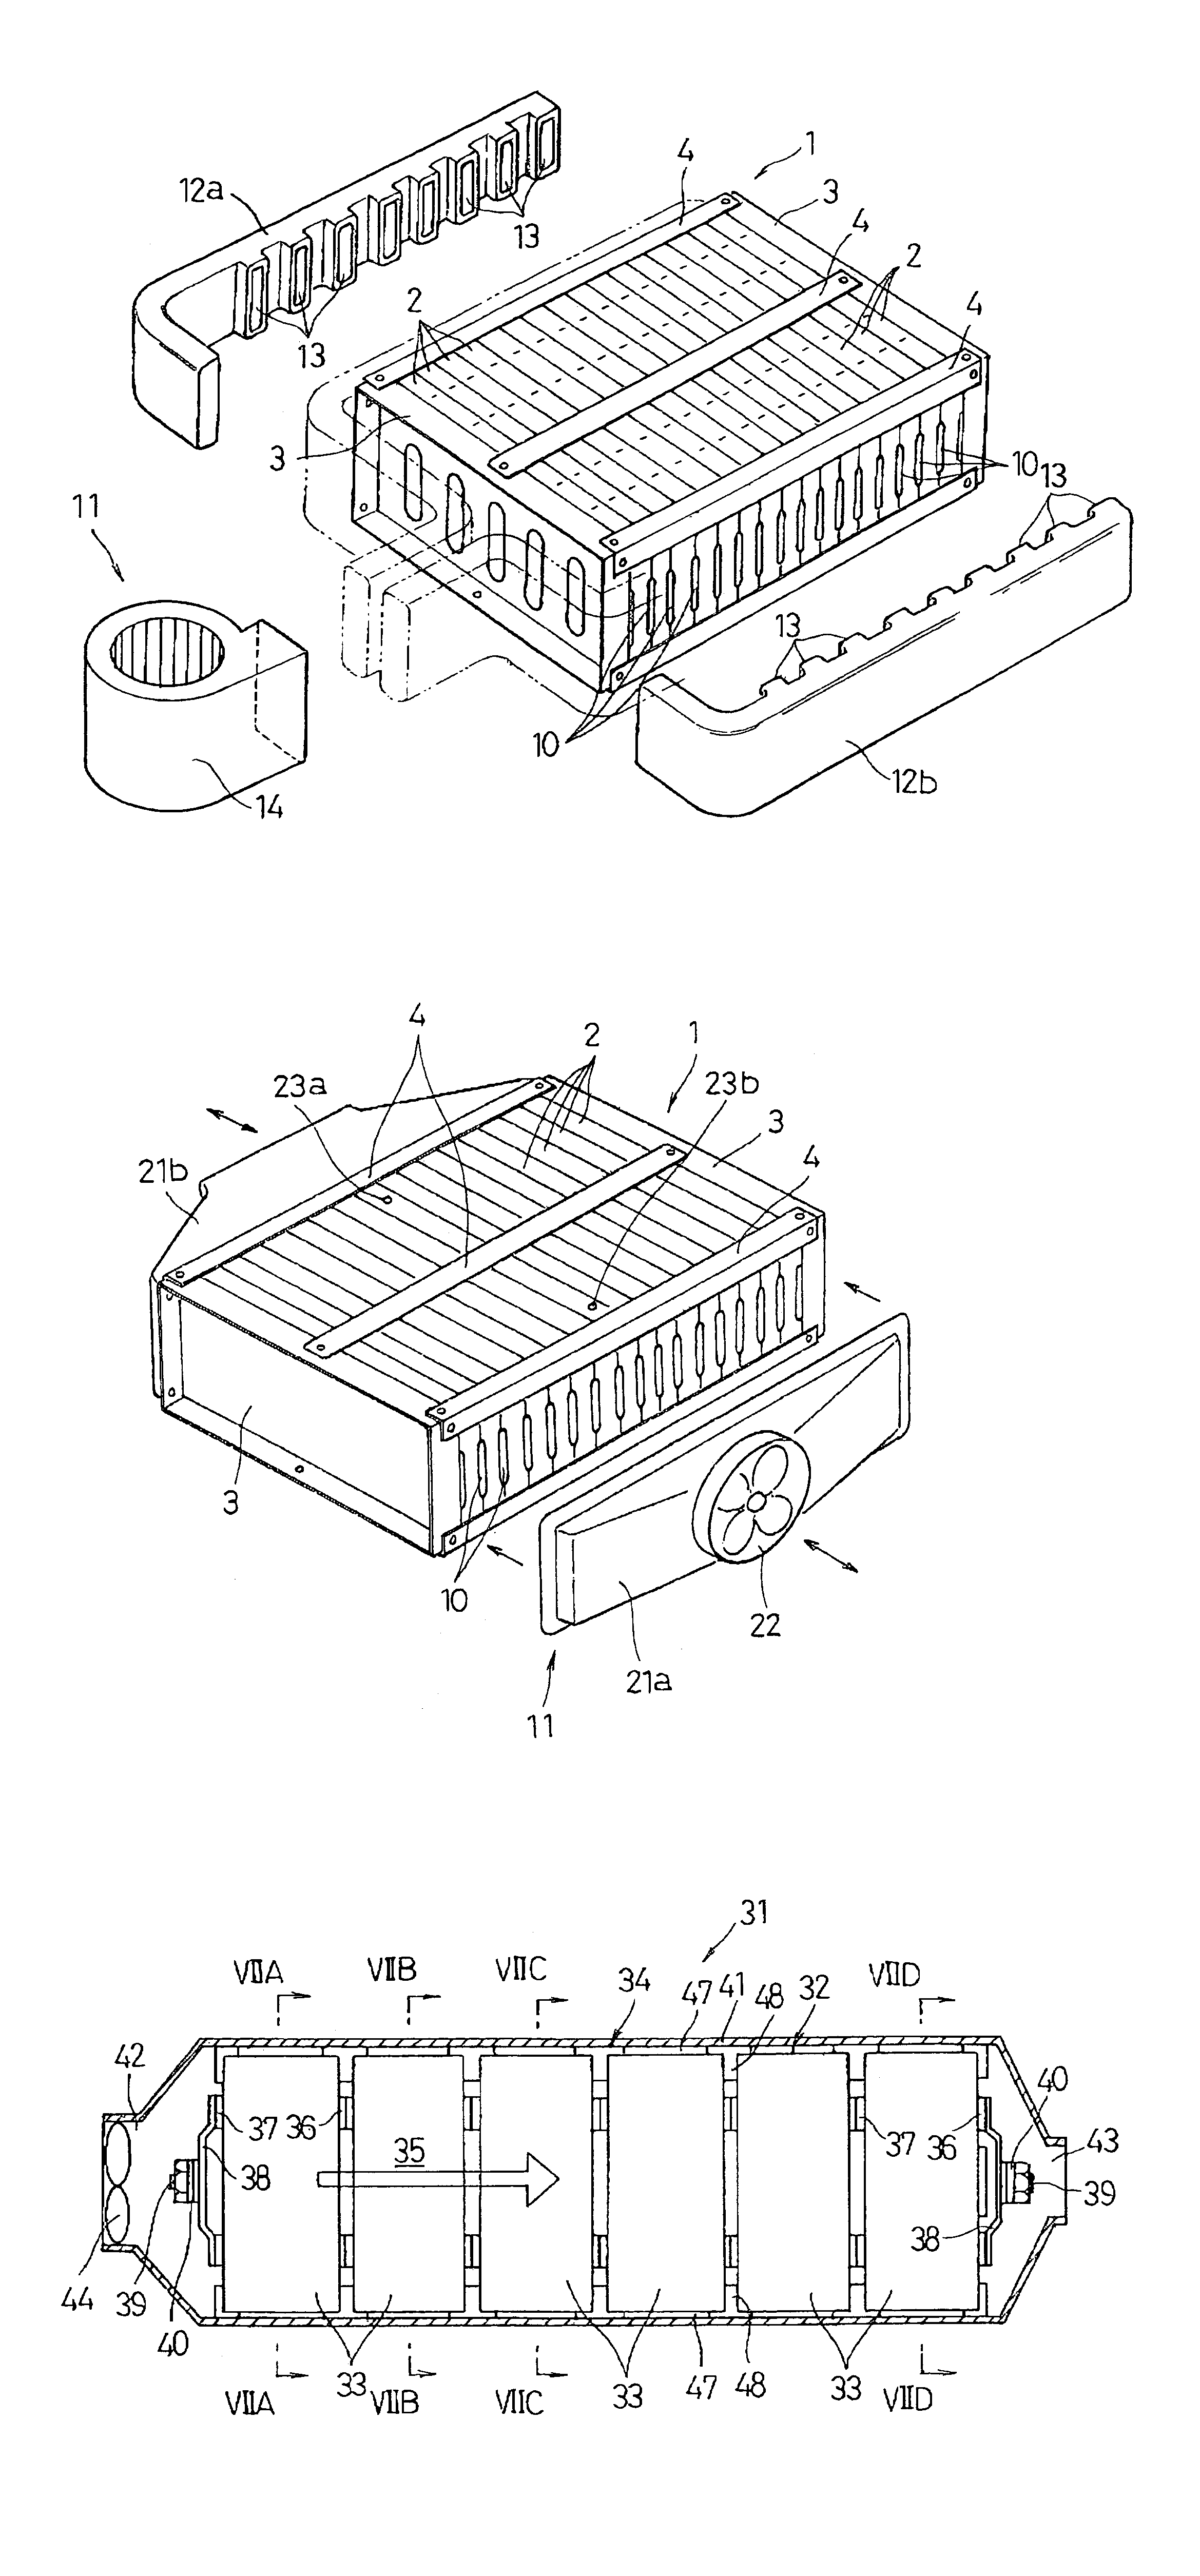 Cooling device for battery pack and rechargeable battery